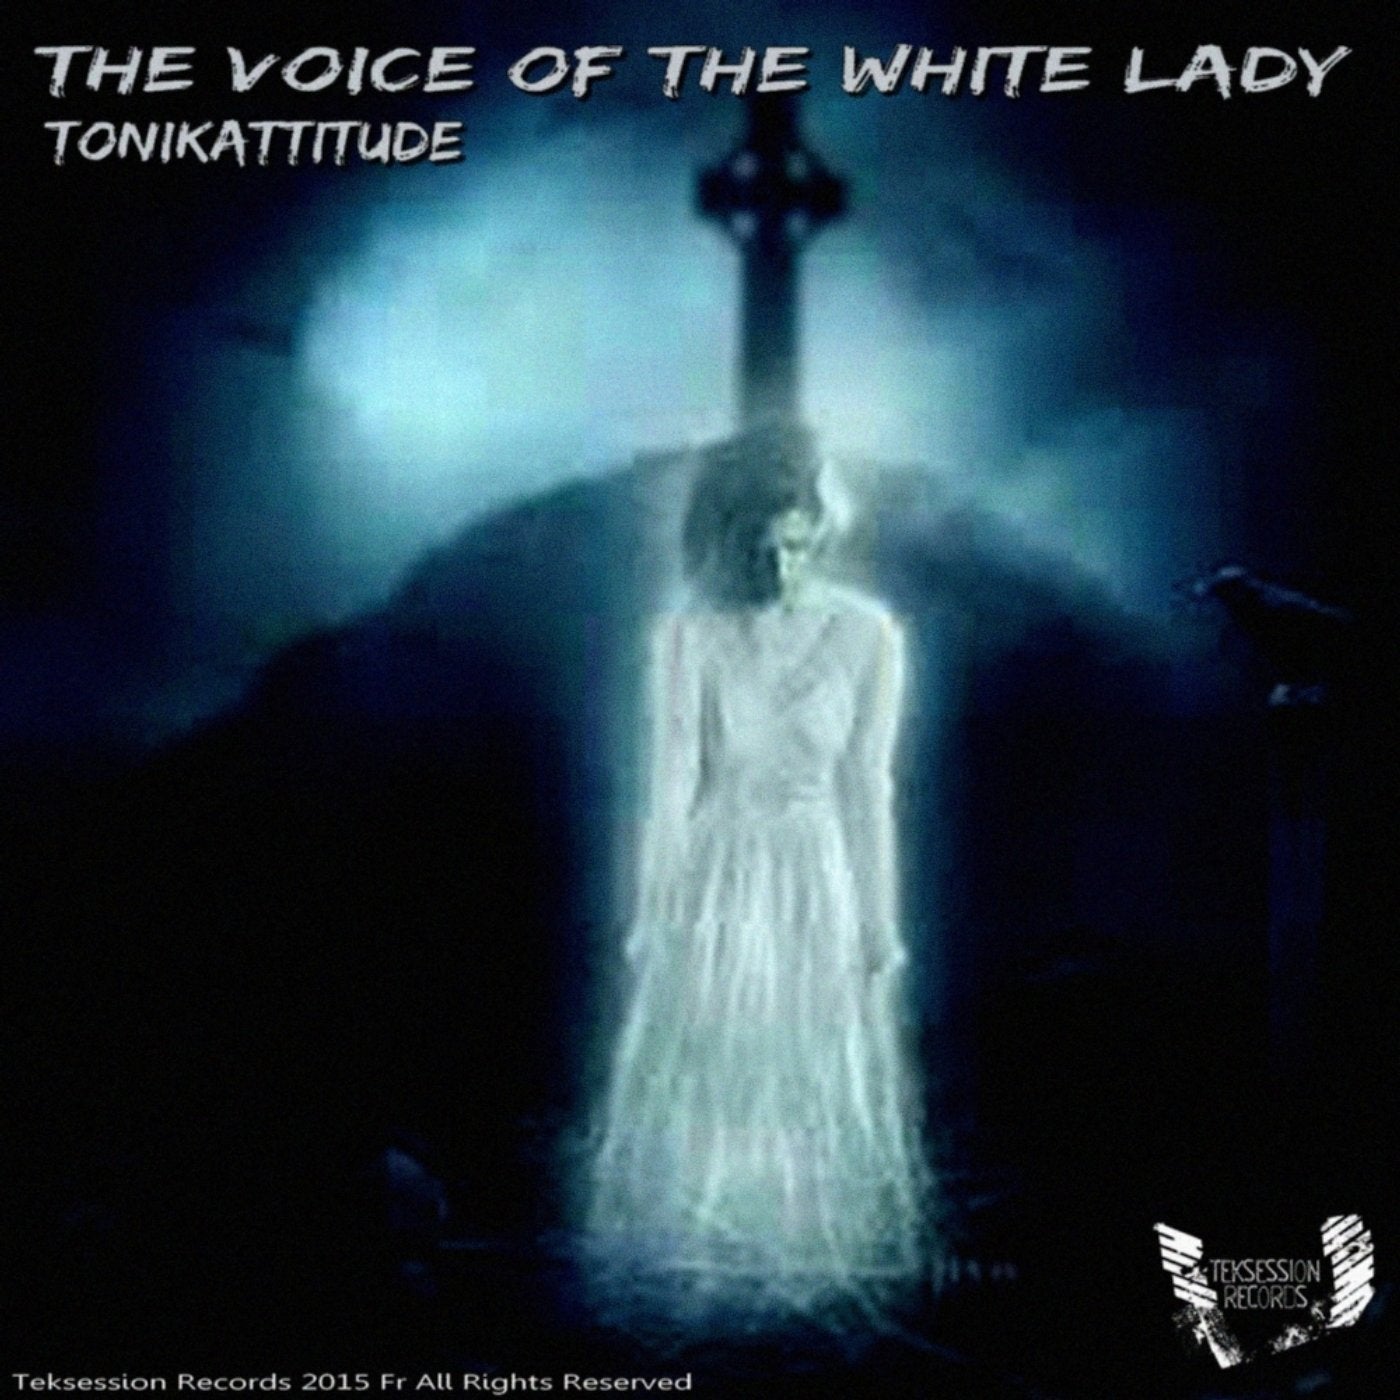 The Voice of The White Lady